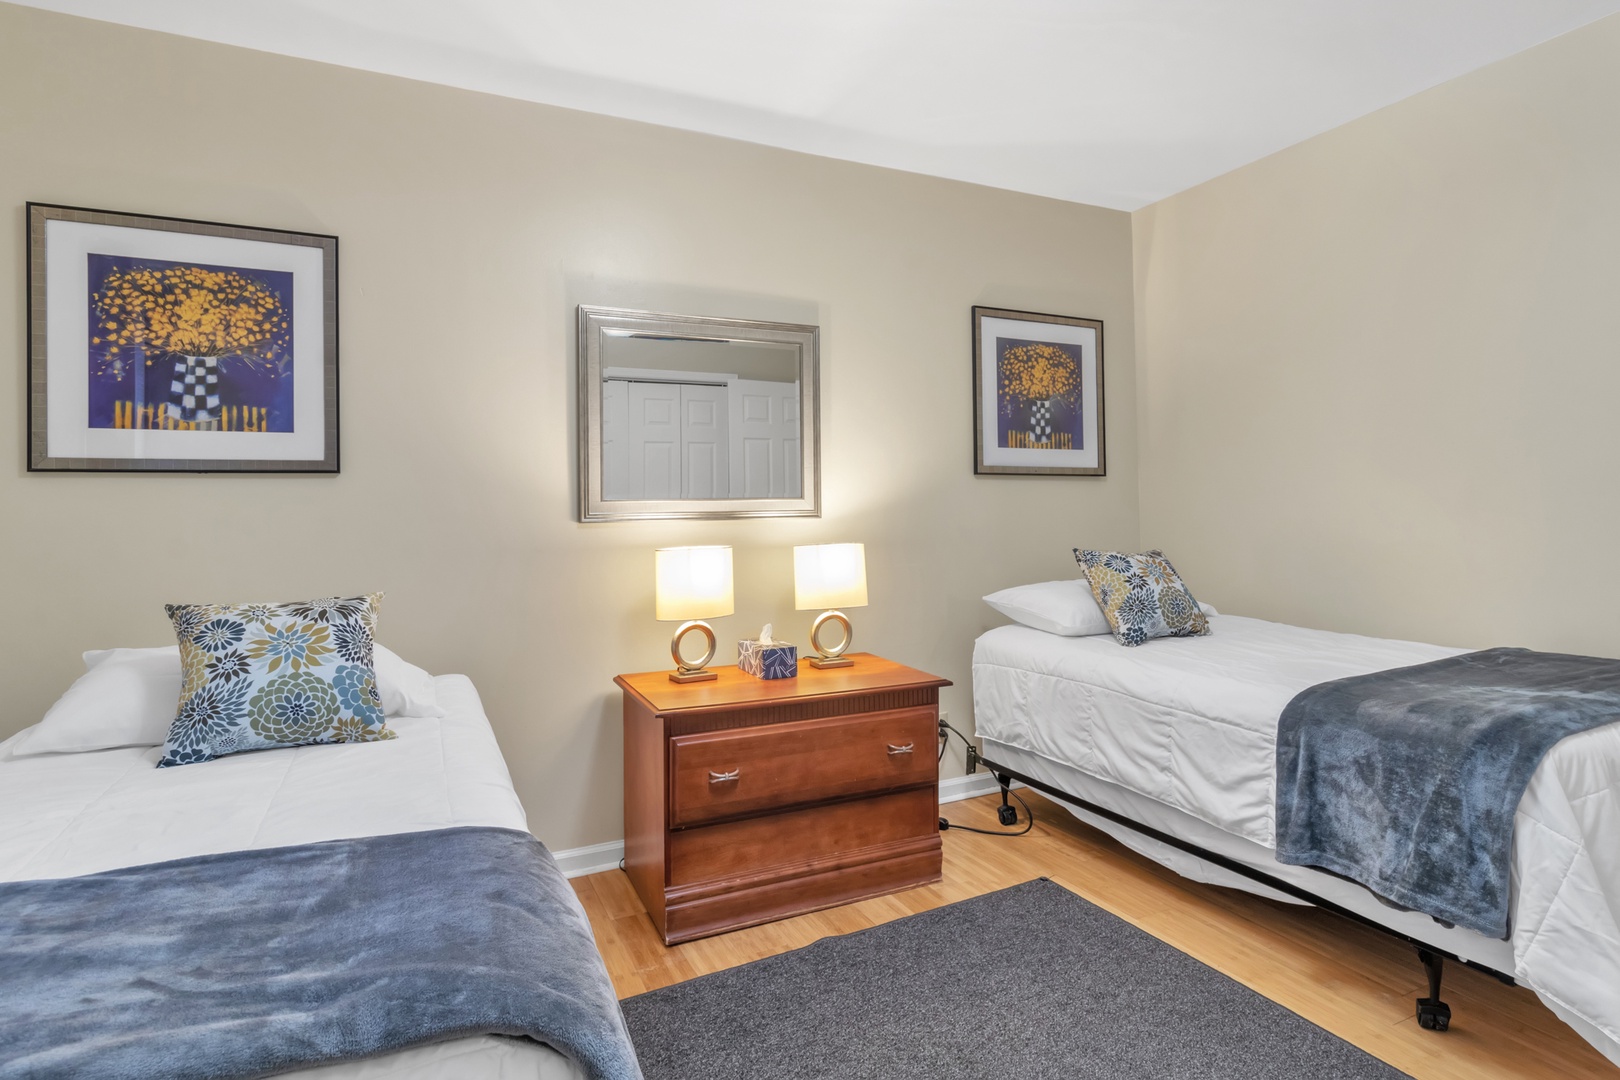 The final bedroom offers a pair of cozy twin beds